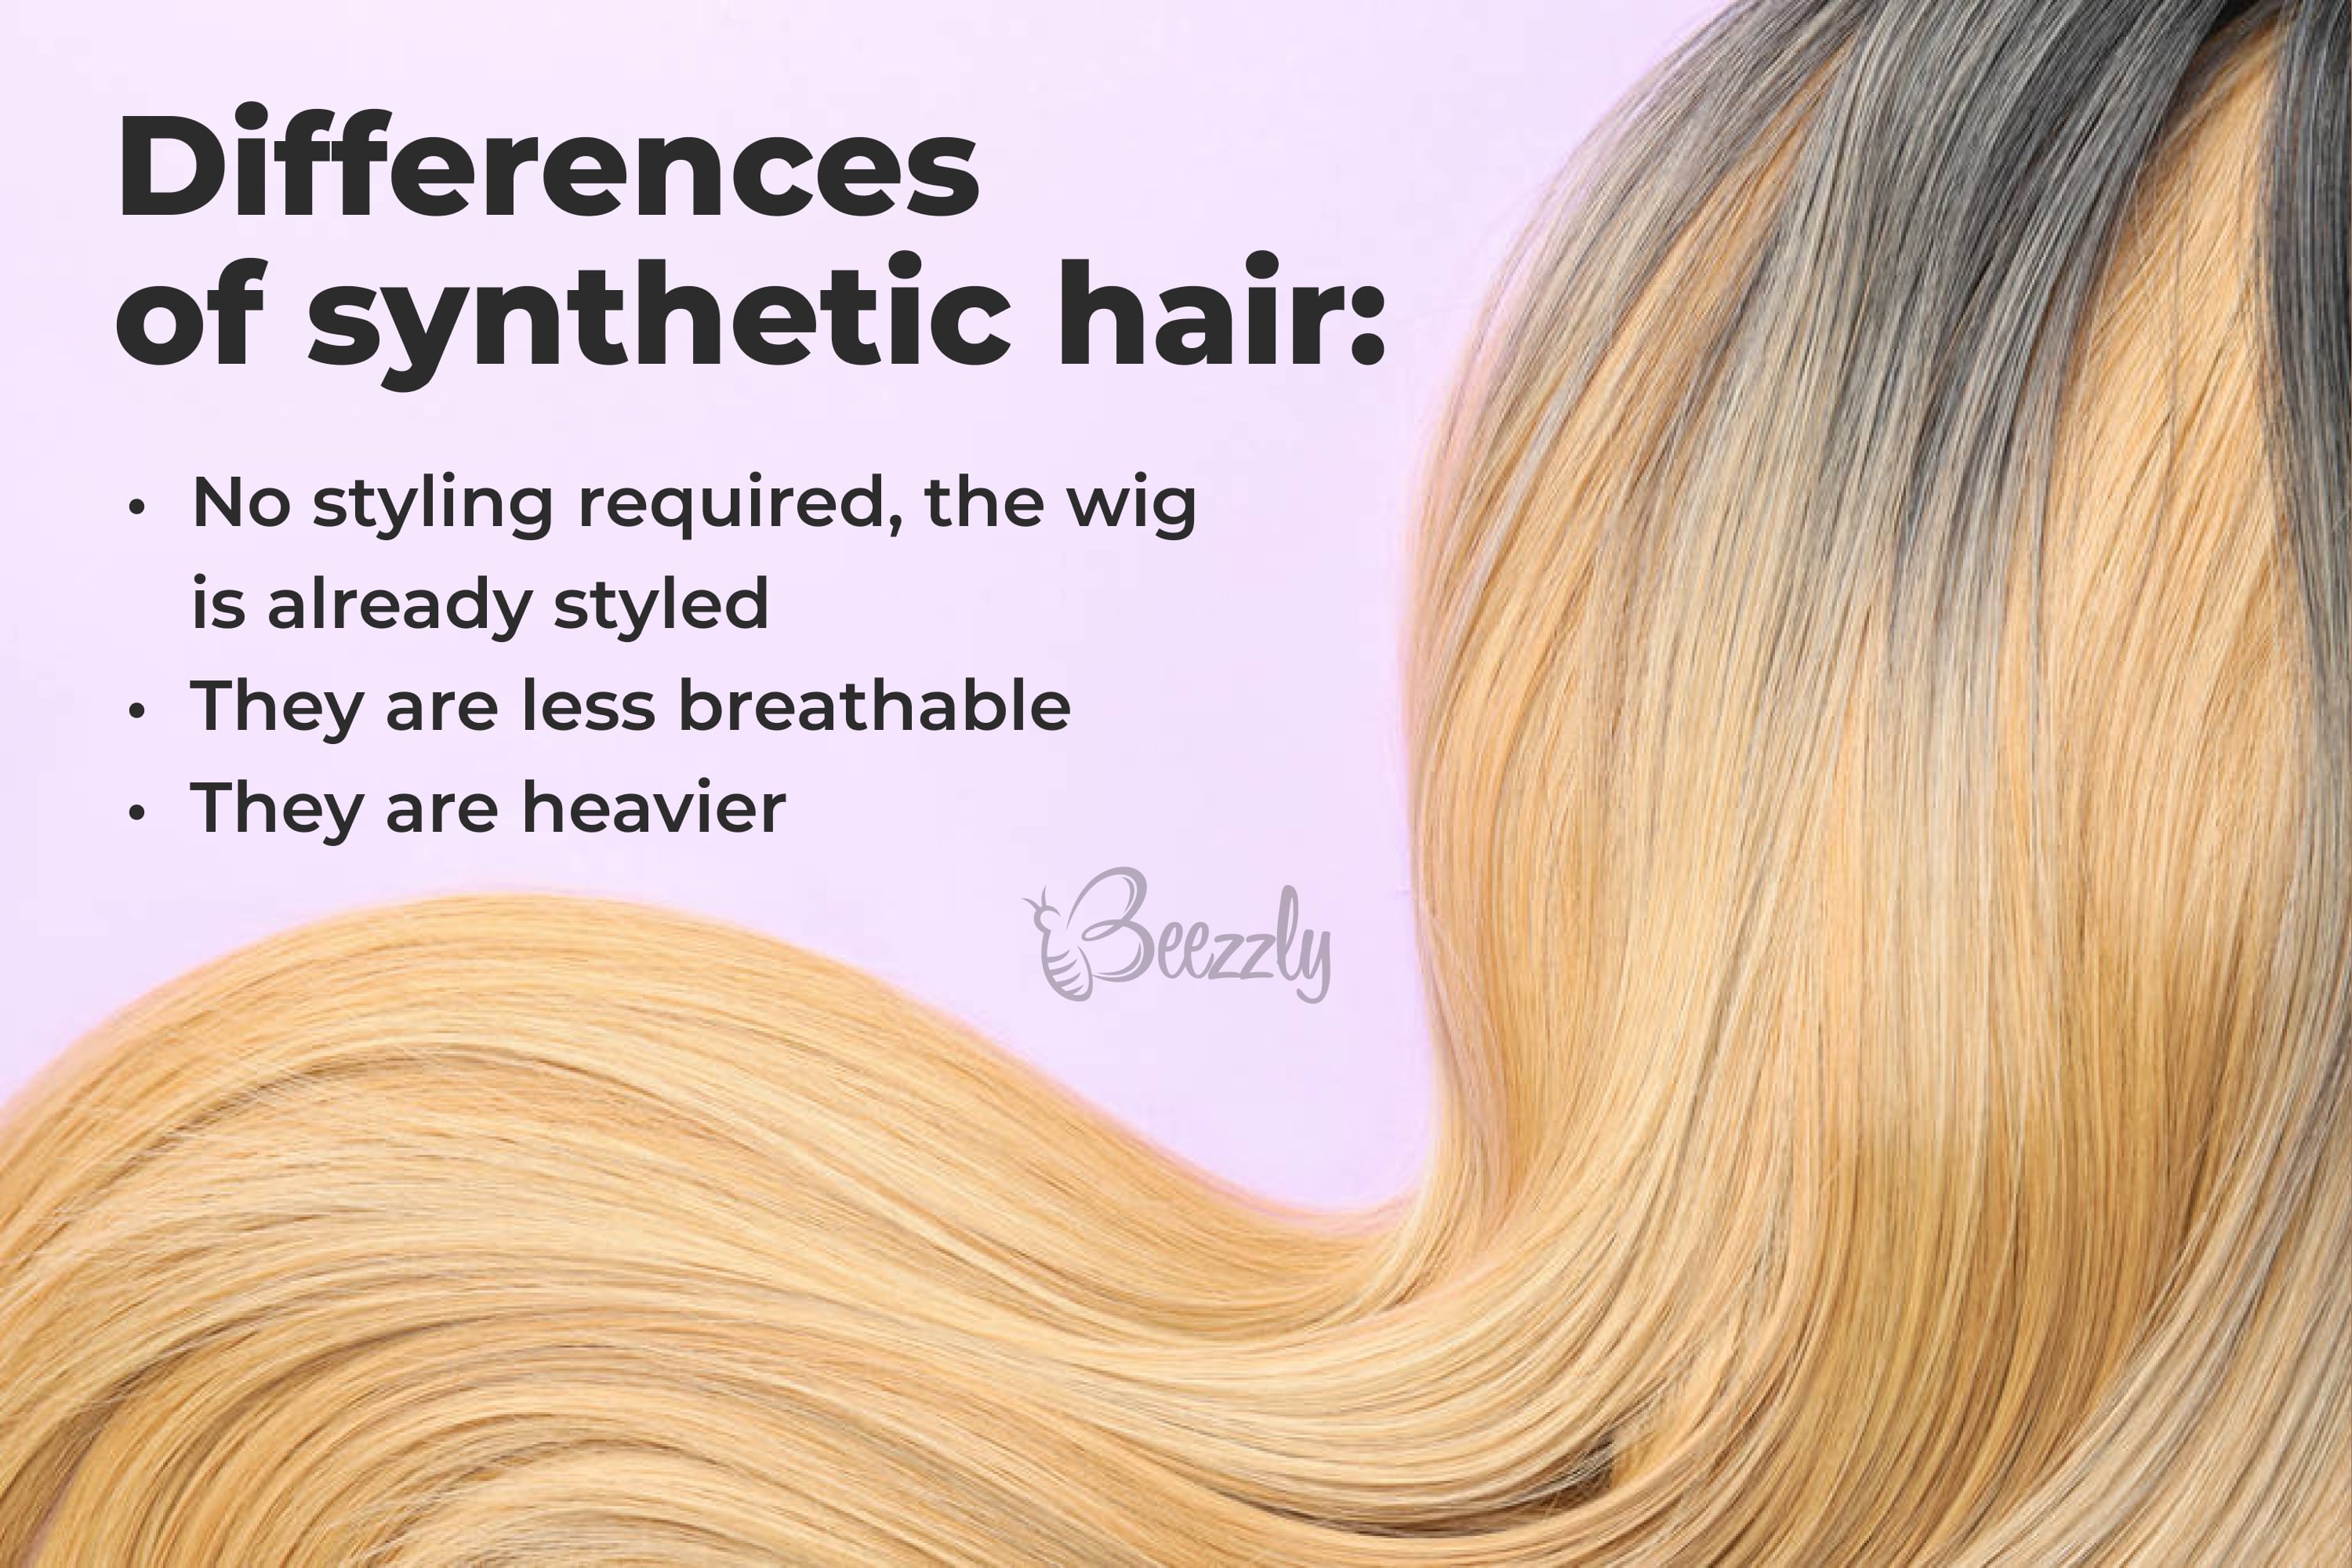 Differences of synthetic hair